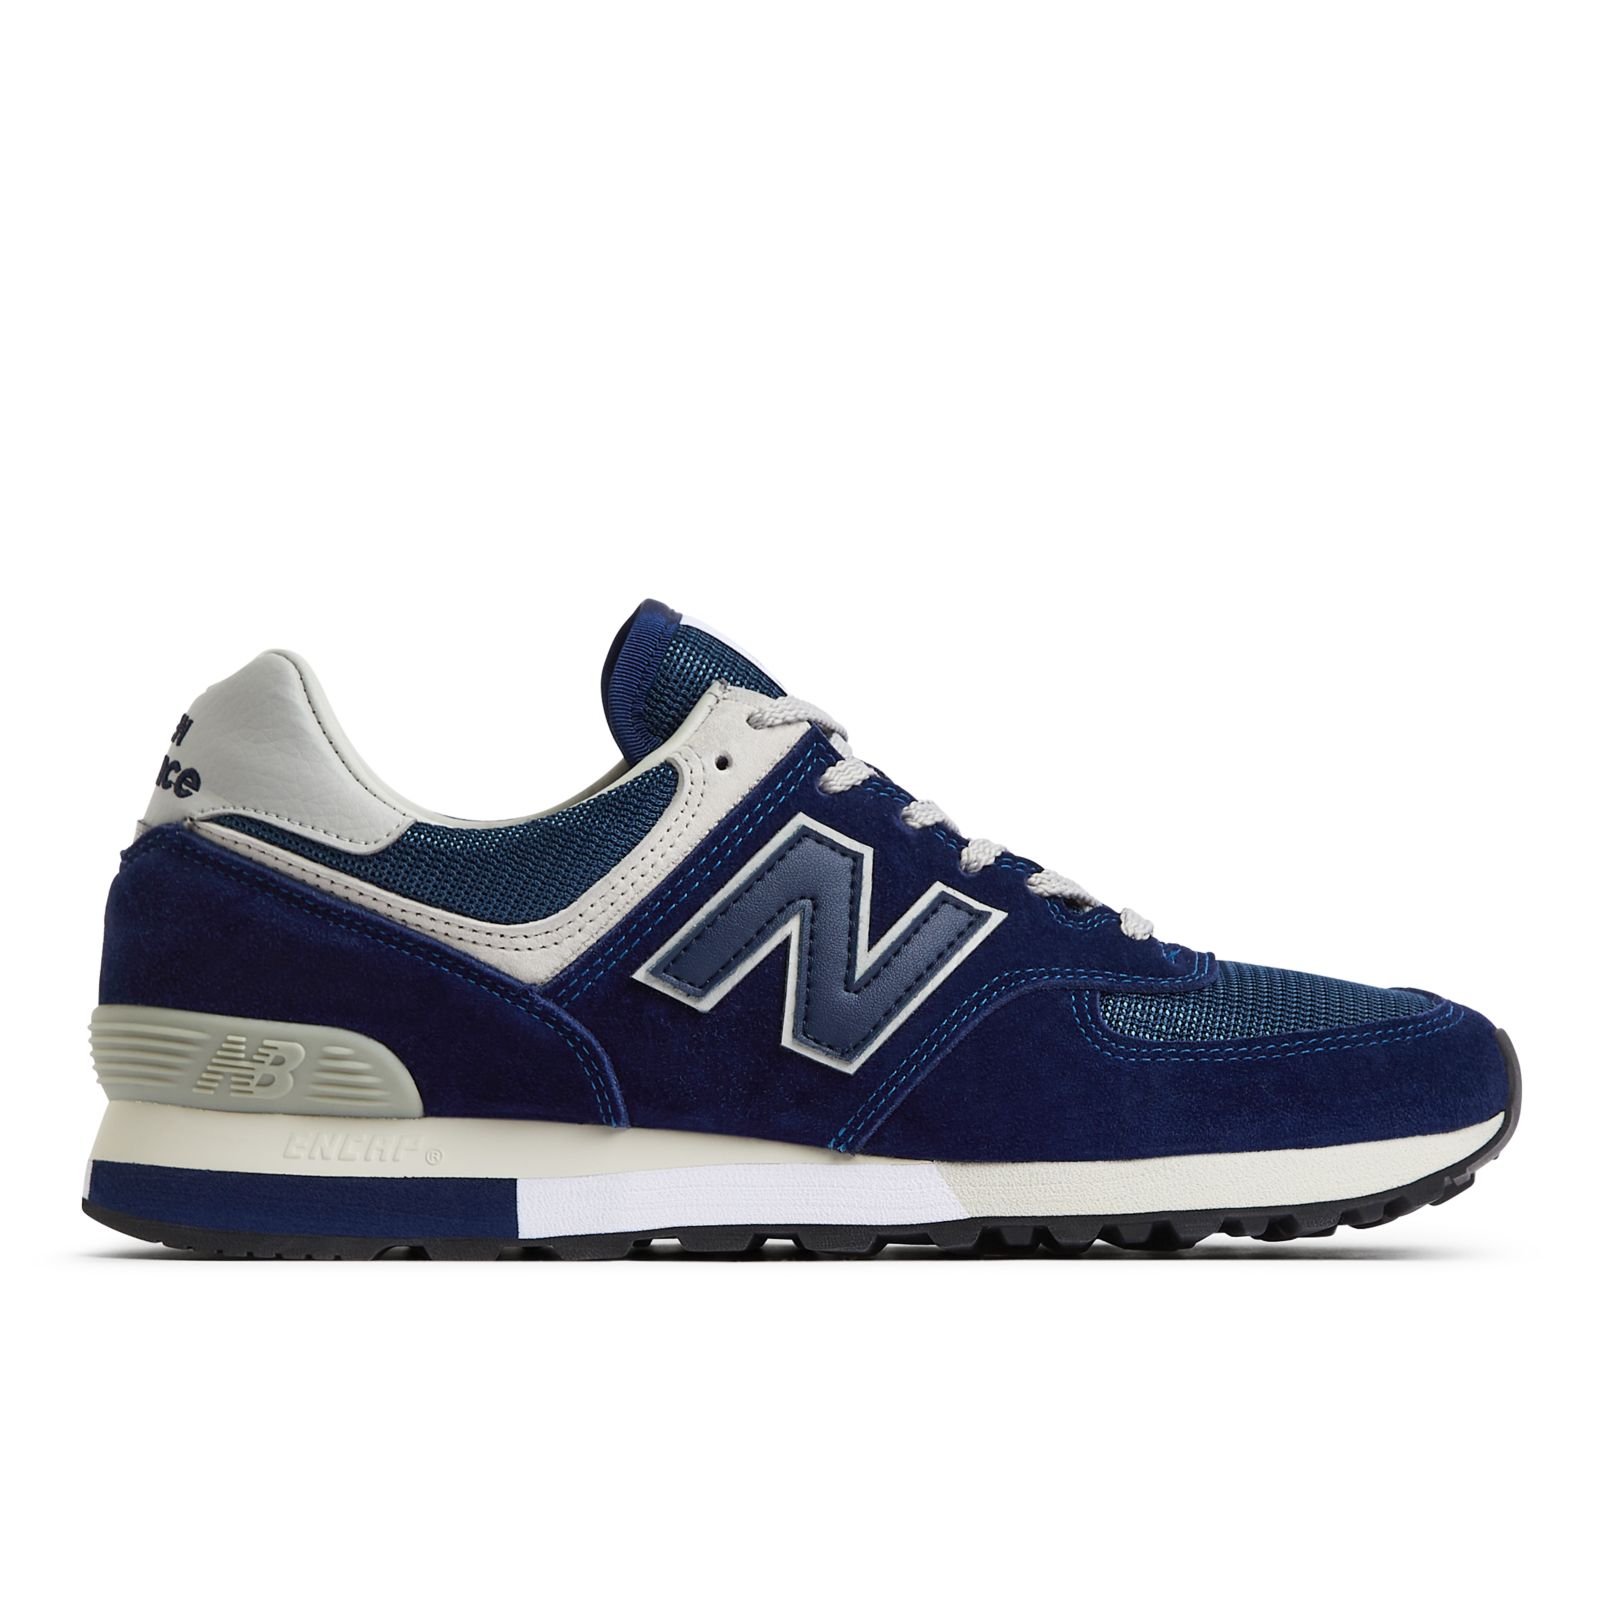 Clan Tomaat maagd Unisex MADE in UK 576 35th Anniversary Lifestyle - New Balance